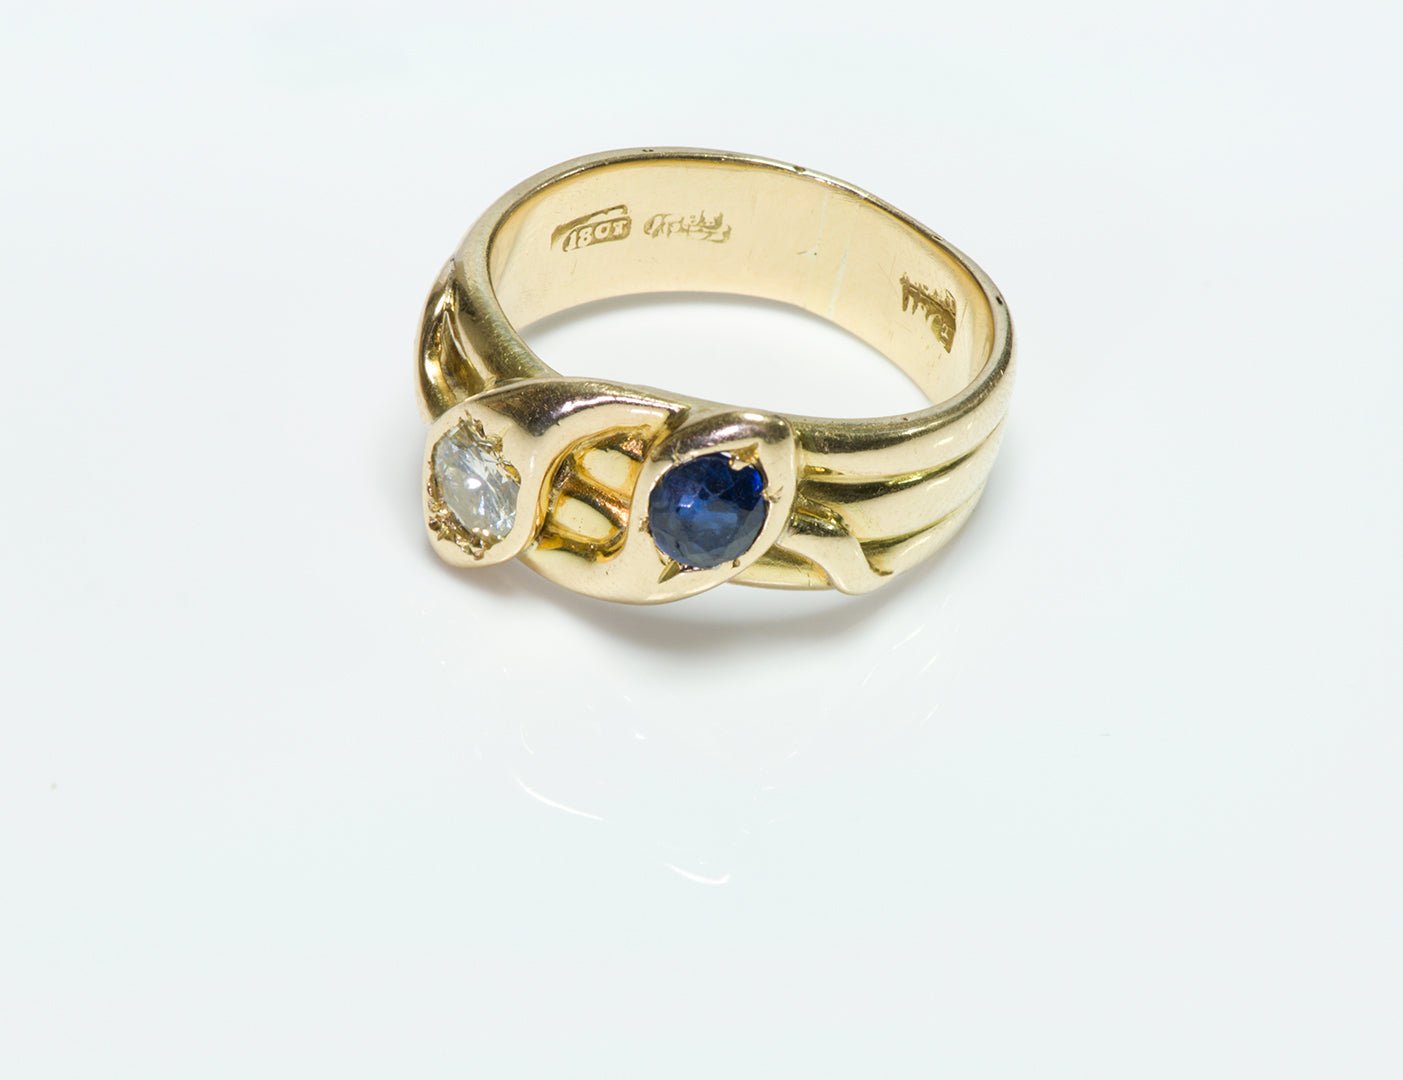 Antique 18K Yellow Gold Diamond and Sapphire Snake Ring - DSF Antique Jewelry